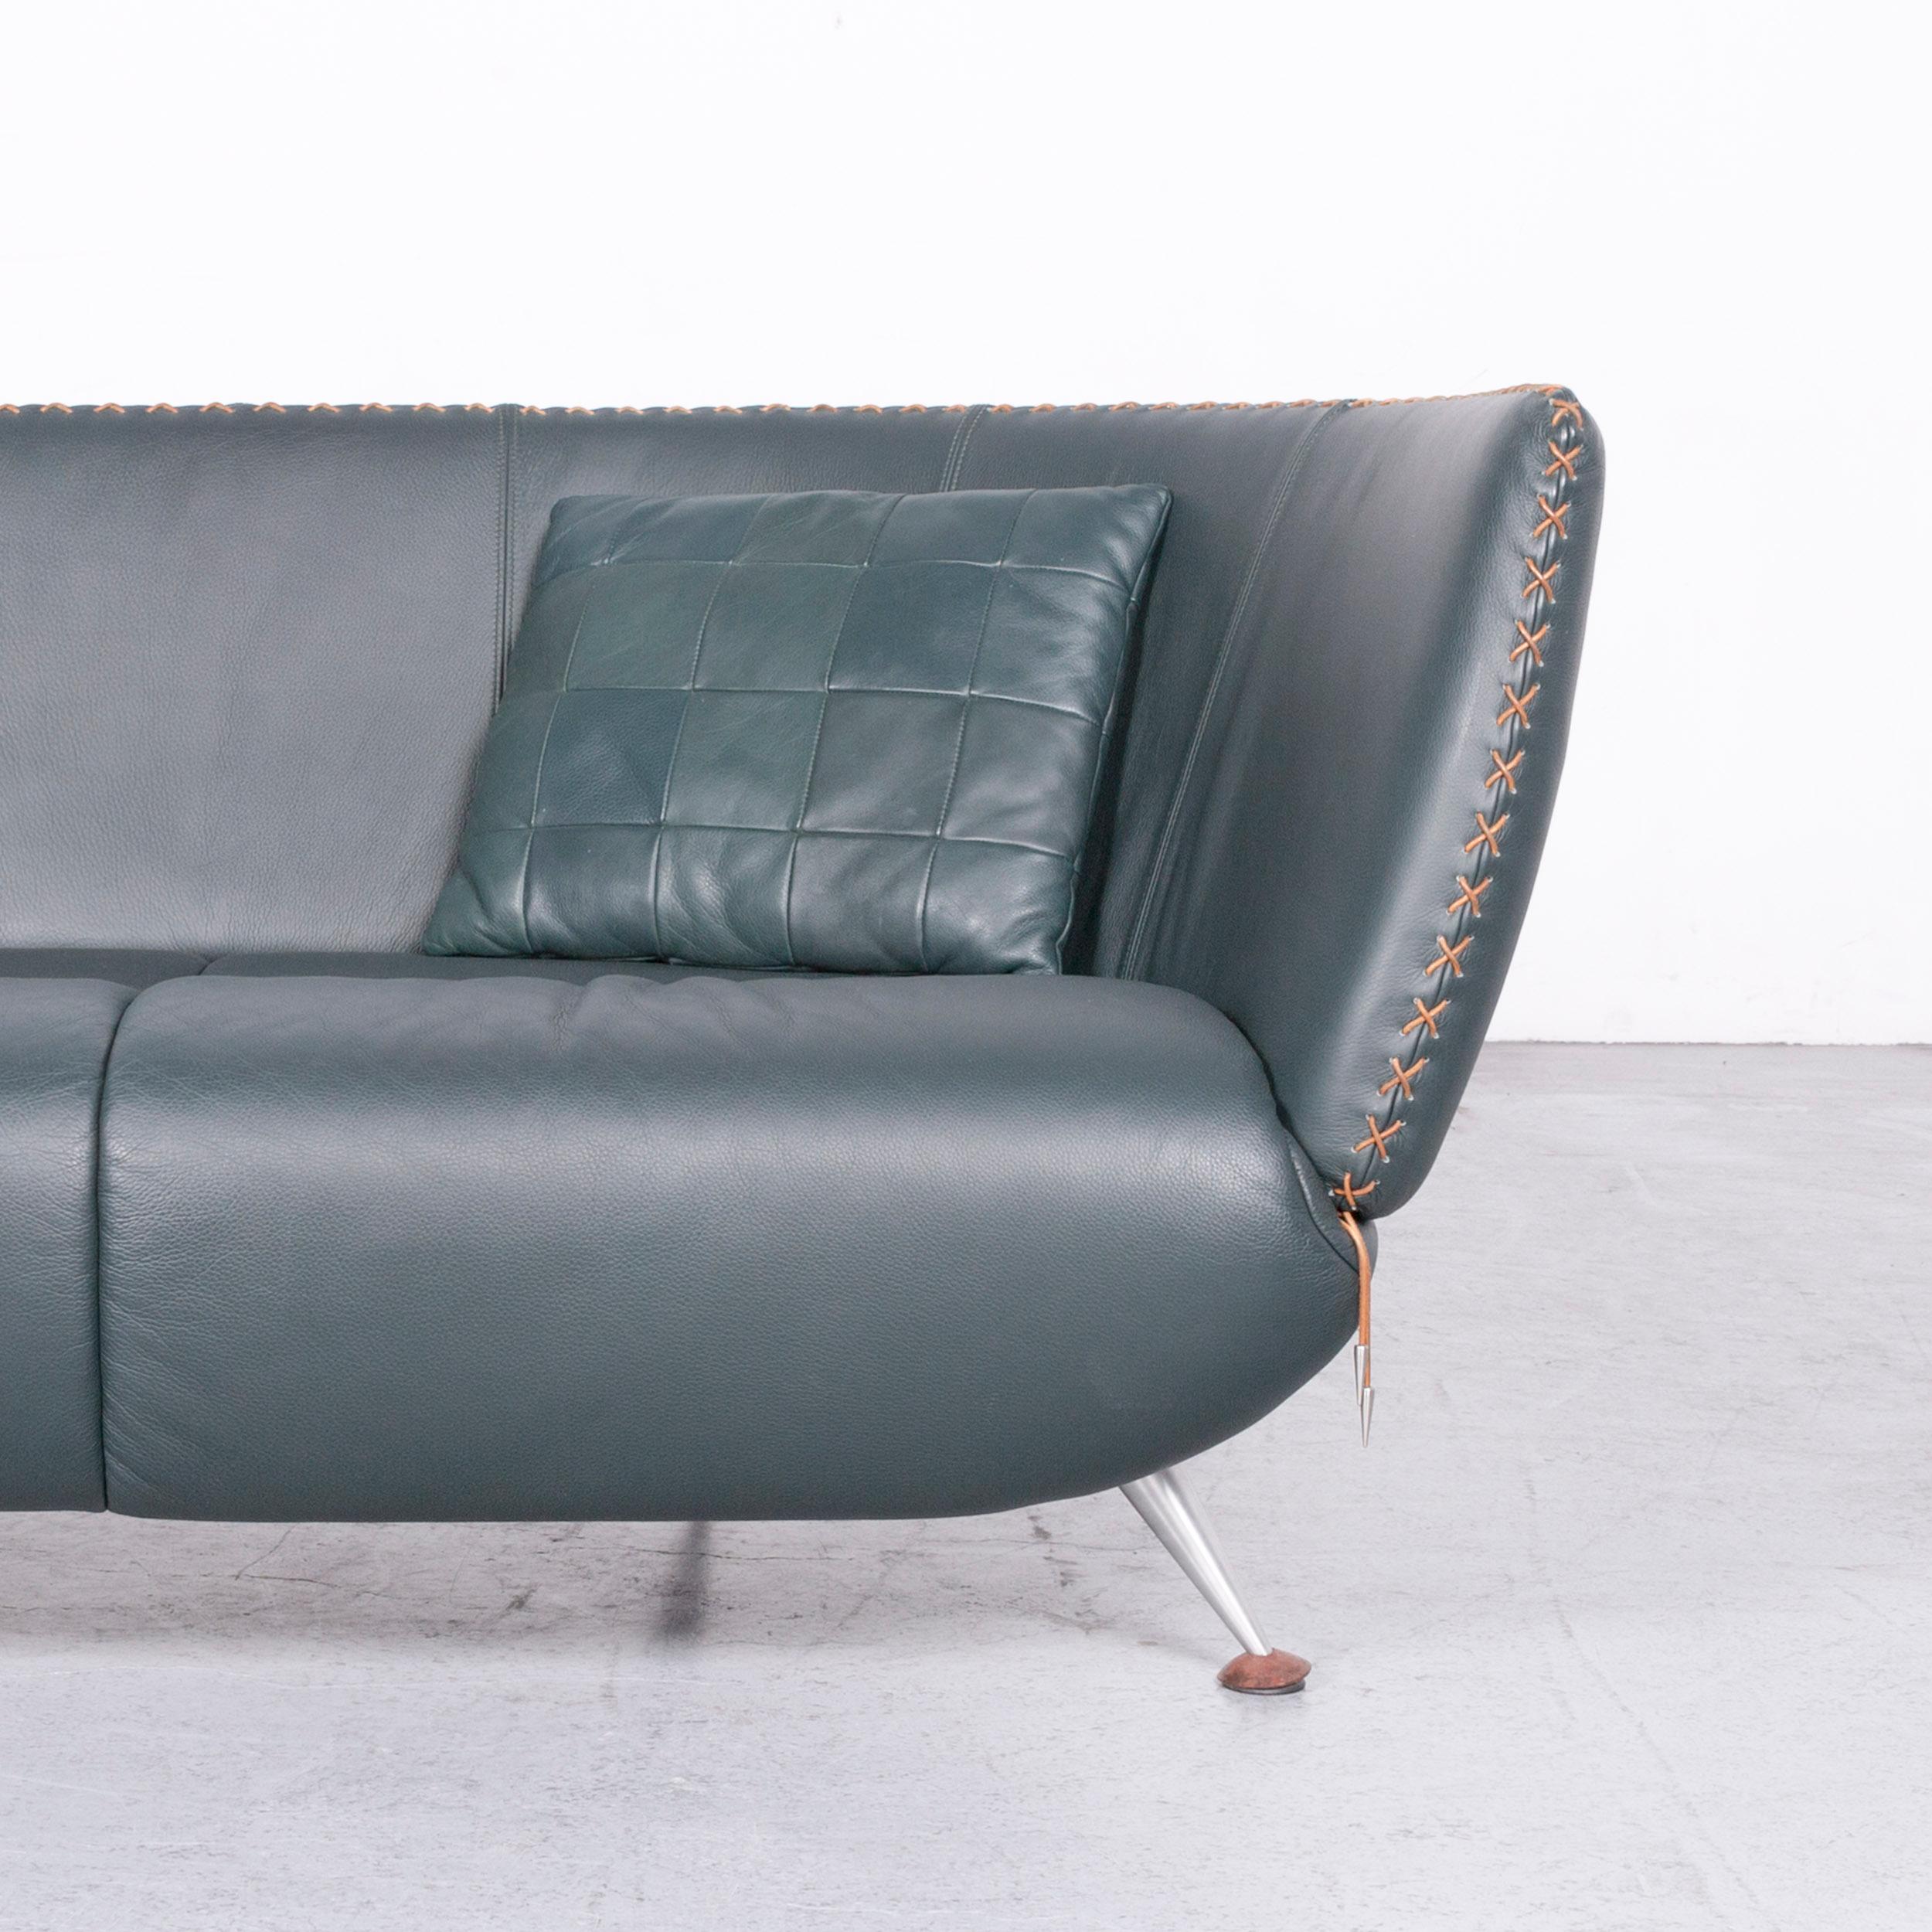 De Sede Ds 102 Designer Leather Sofa Green Two-Seat Couch In Excellent Condition For Sale In Cologne, DE